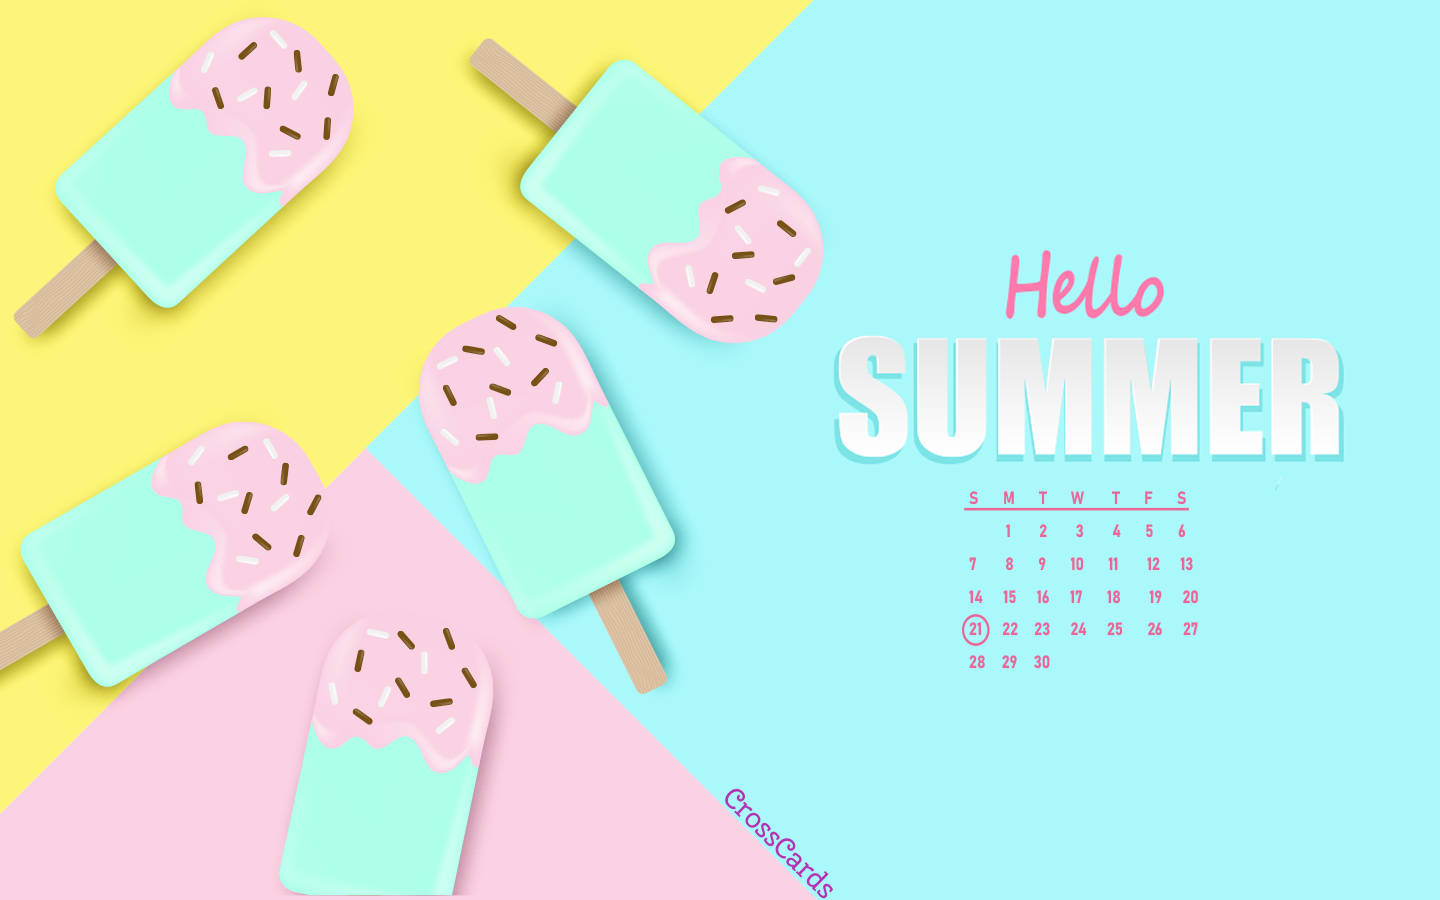 Satisfy your sweet tooth on this warm June day with ice cream bars Wallpaper